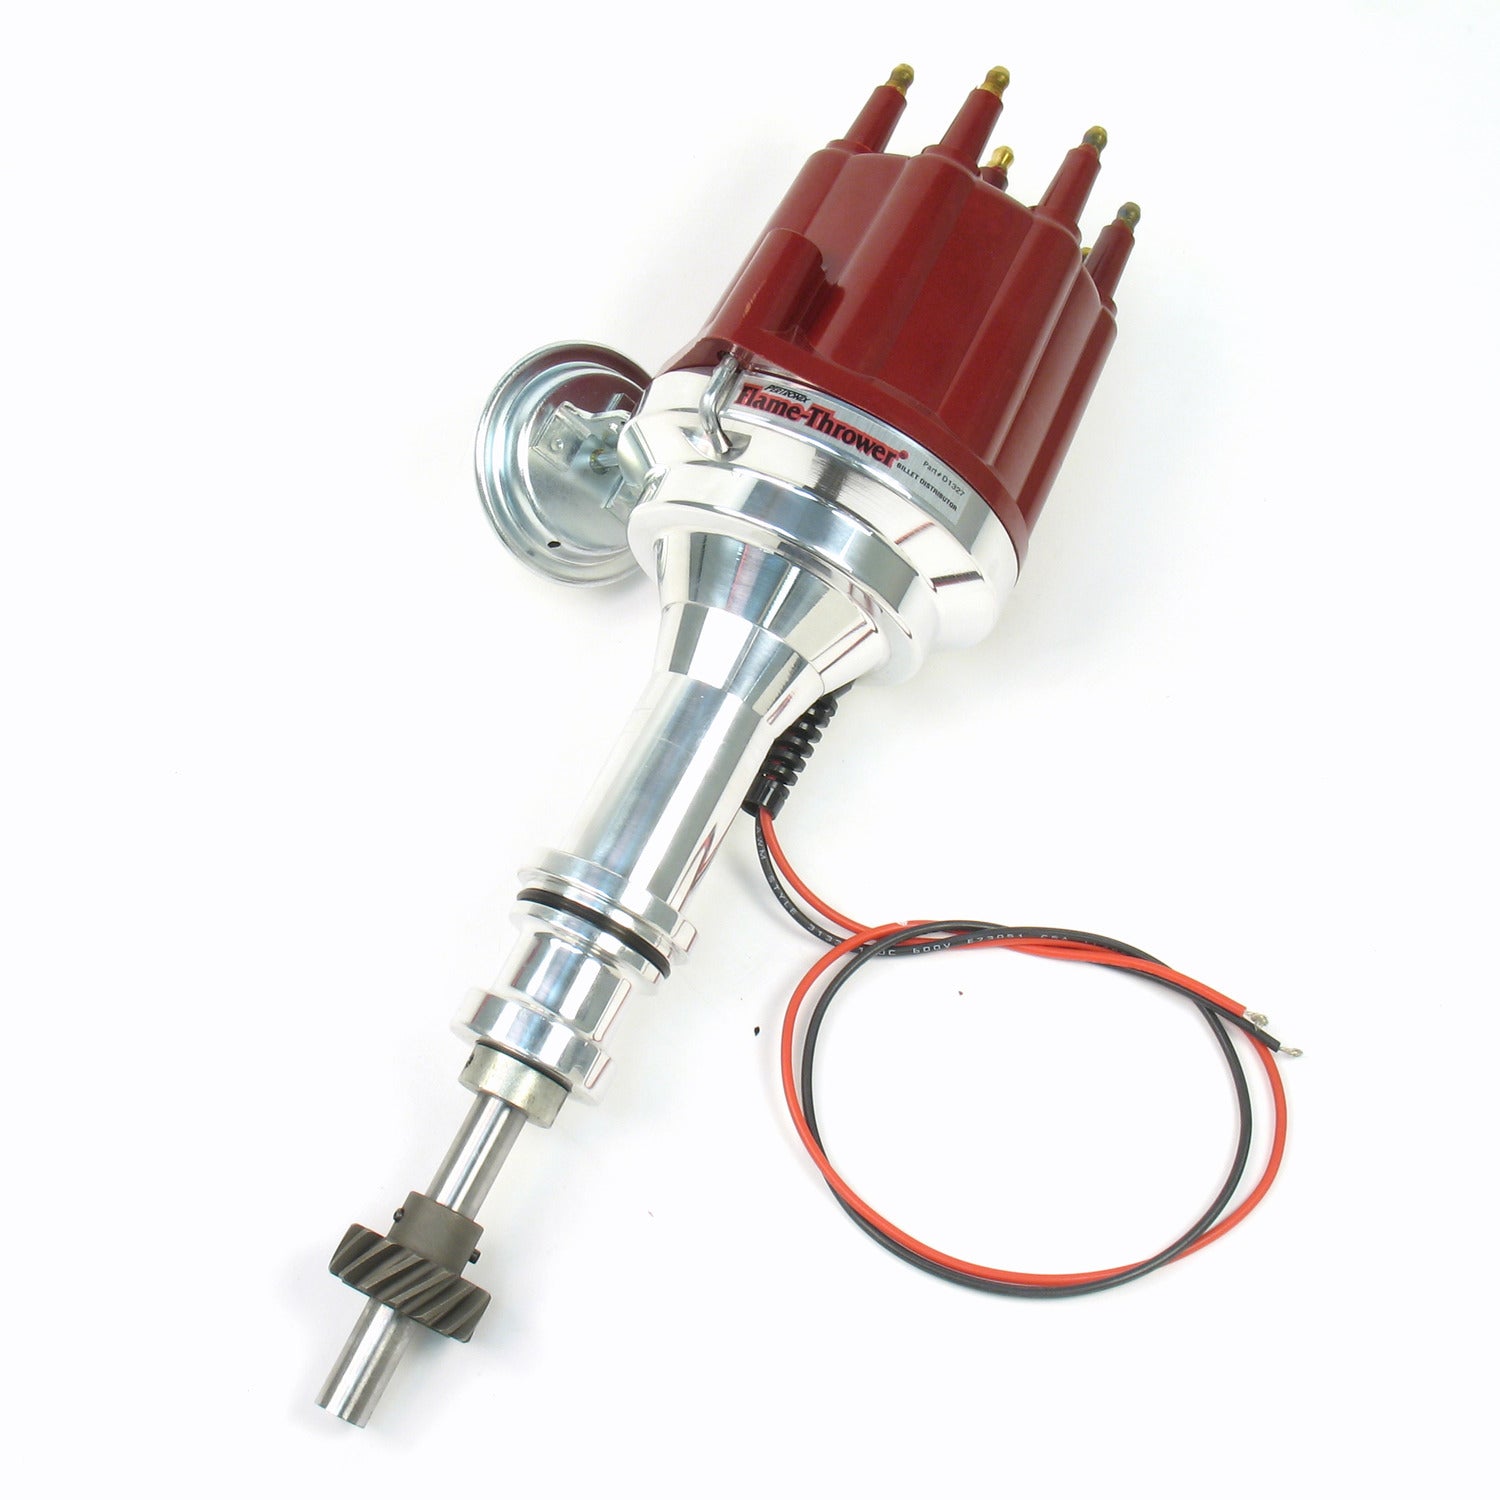 PerTronix D132711 Flame-Thrower Electronic Distributor Billet Ford 351C Plug and Play with Ignitor II Technology Vacuum Advance Red Male Cap